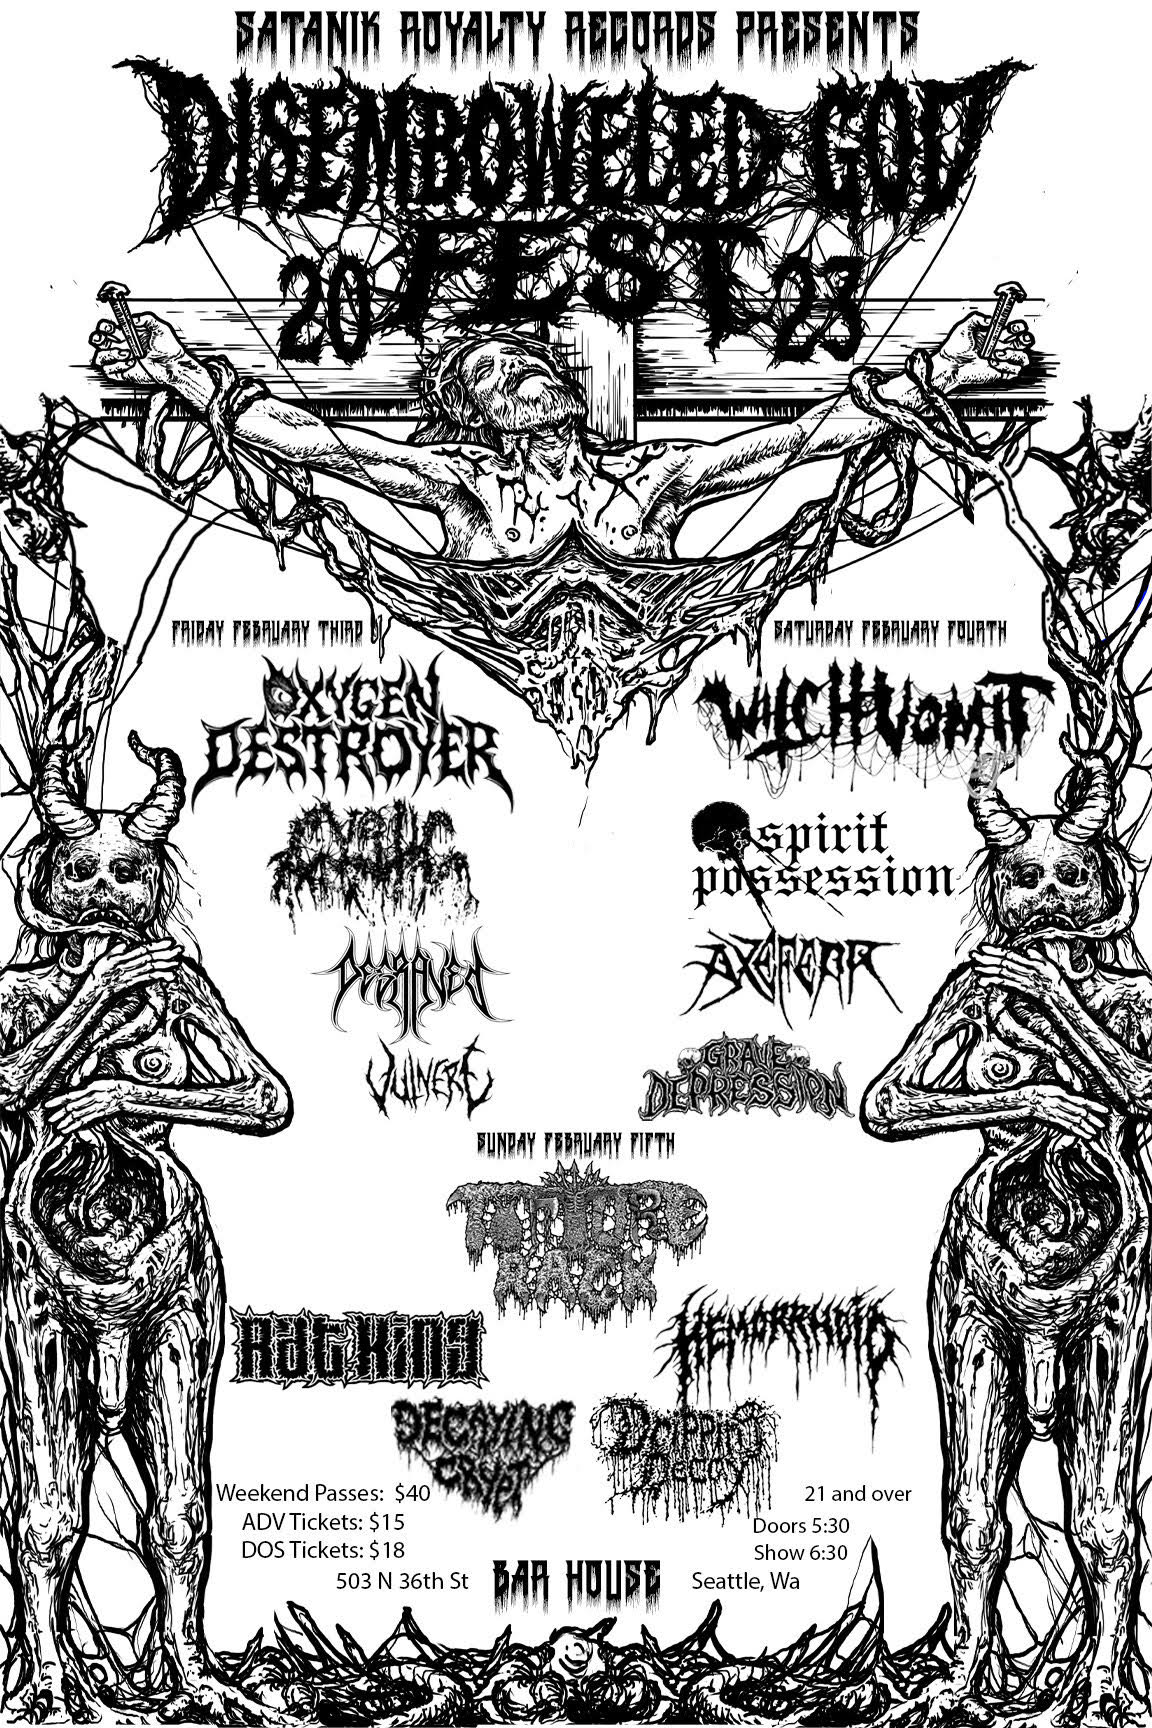 Satanik Royalty Records Presents Inaugural Disemboweled God Fest 2023; On Sale NOW! Earsplit Compound